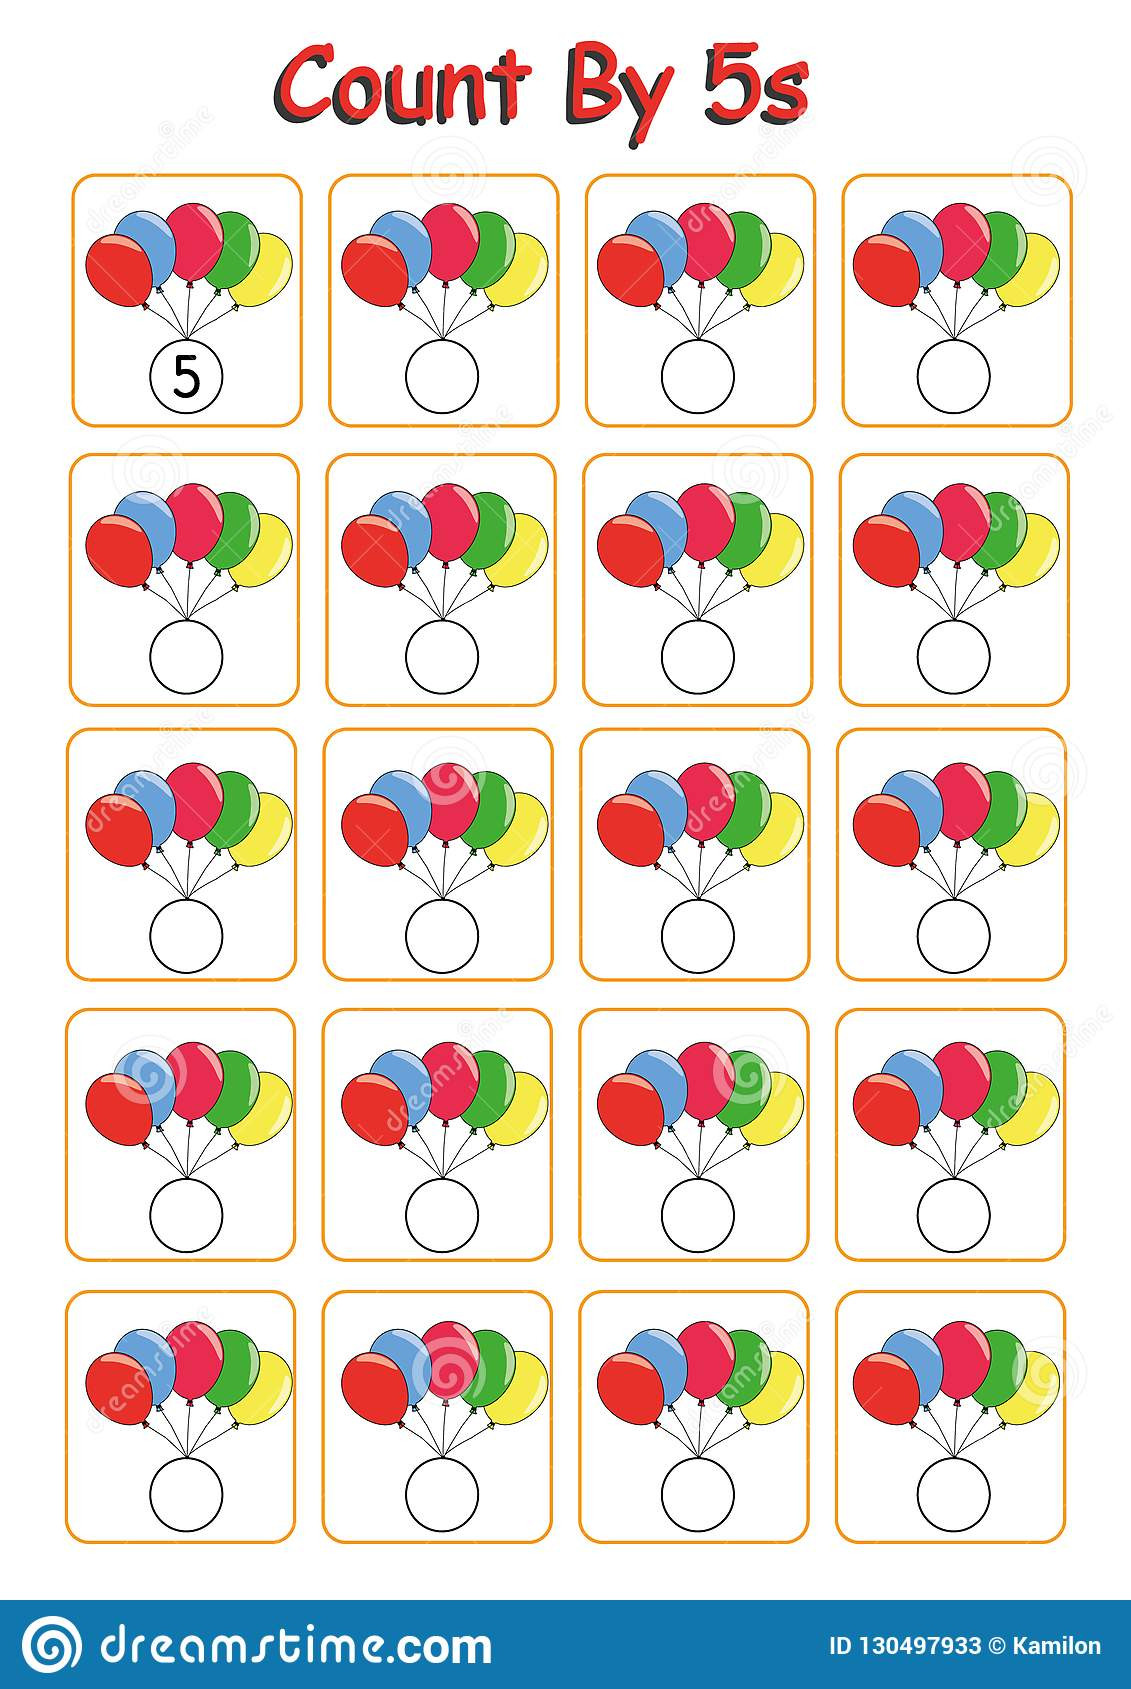 Counting by 5s Worksheet Count by 5s Practice Worksheet Write the Missing Numbers